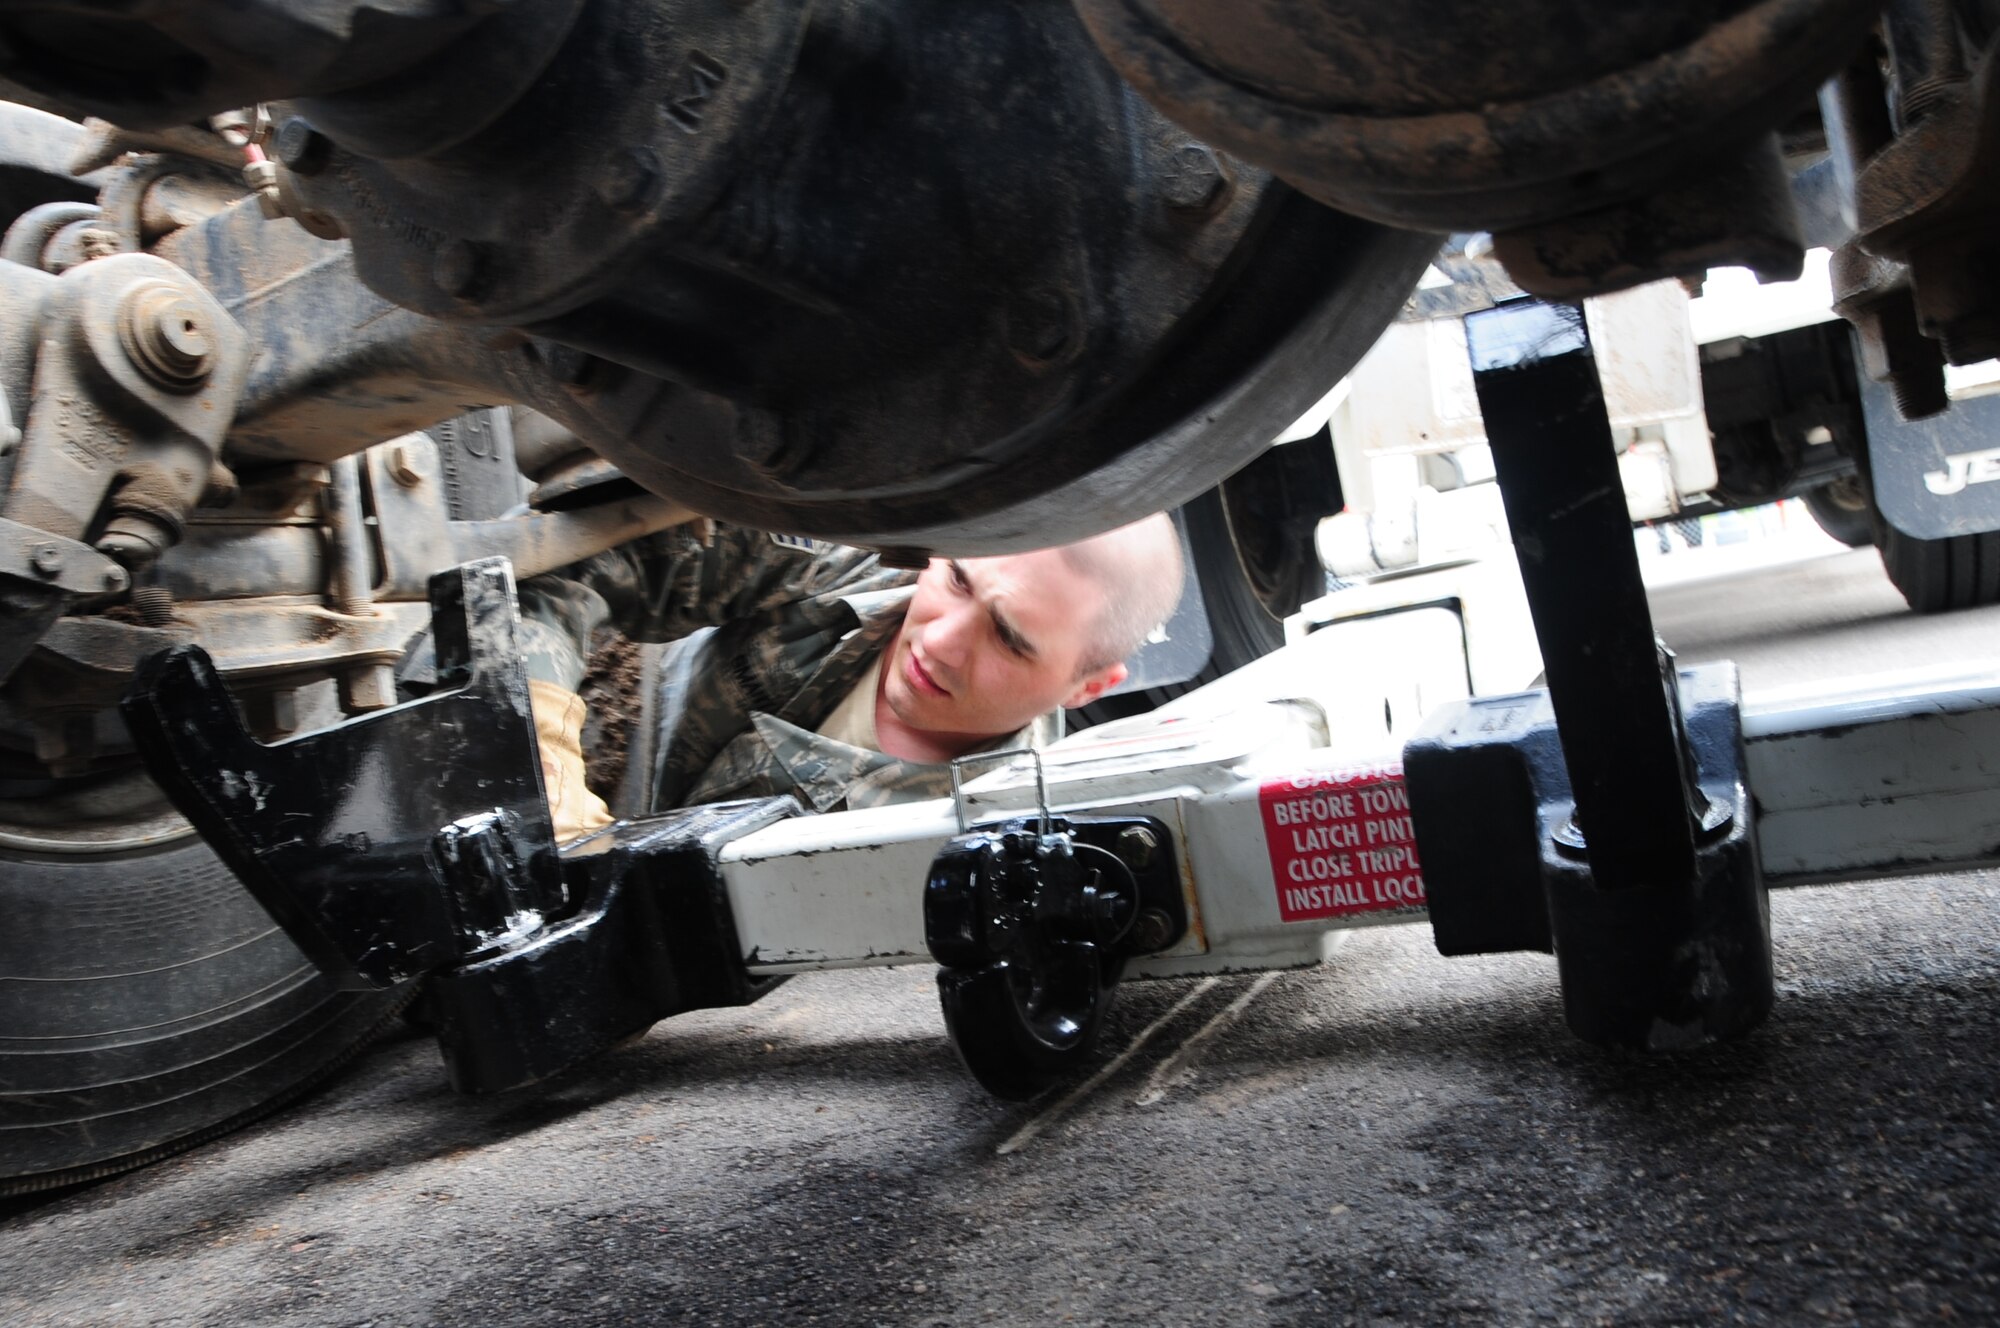 Senior Airman Thomas Smart, 28th Logistics Readiness Squadron vehicle operator, checks the position of the hydraulic under lift on a 5-ton wrecker to slide it under a vehicle for towing.  Proper positioning ensures safety when lifting vehicles. (U.S. Air Force photo/Senior Airman Anthony Sanchelli)